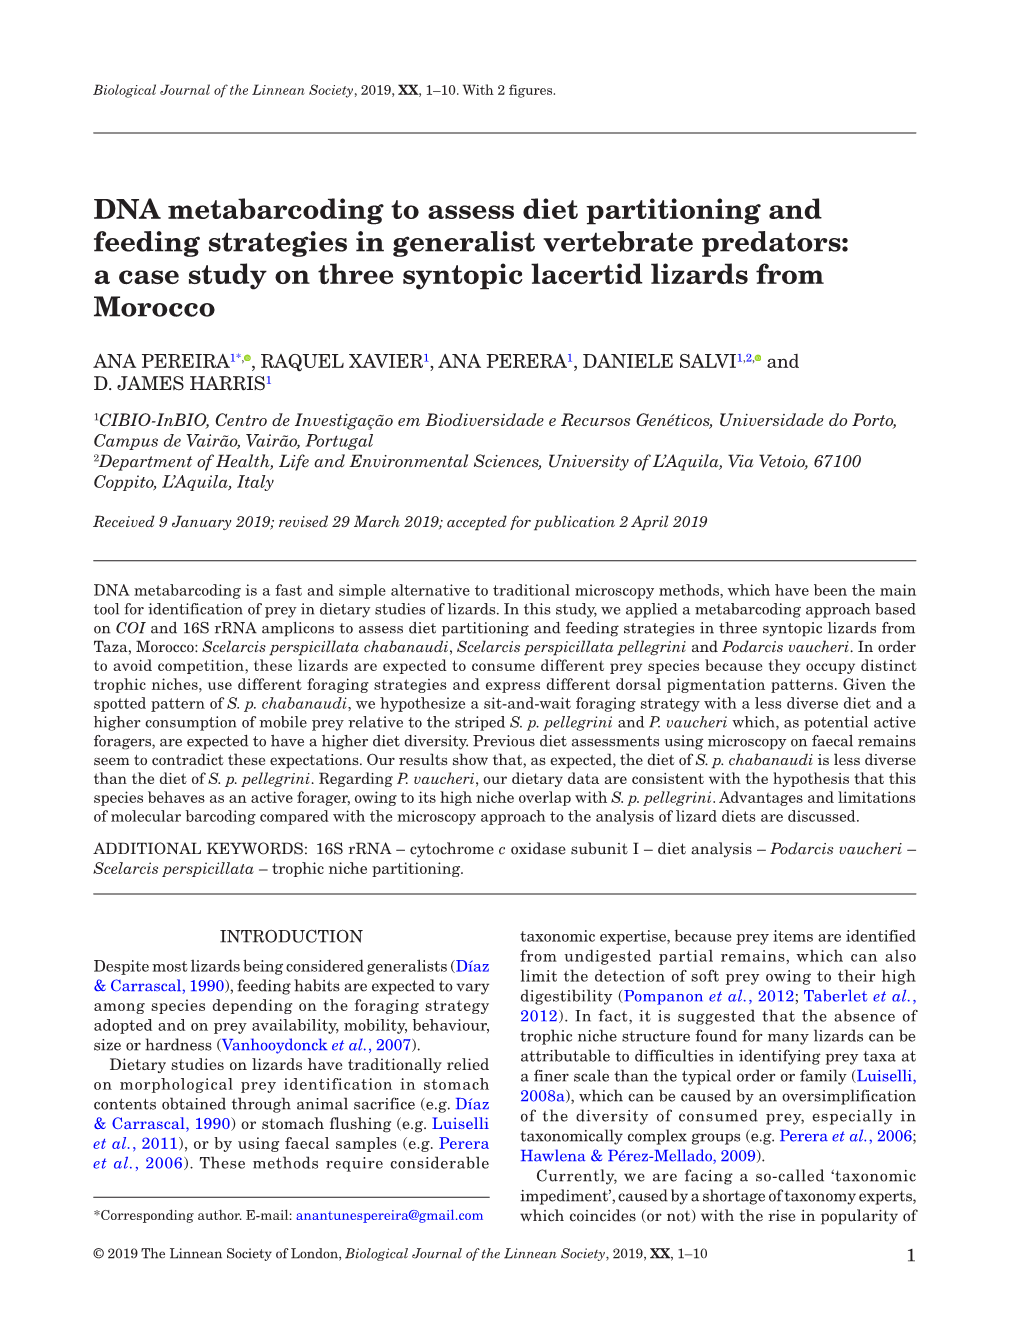 DNA Metabarcoding to Assess Diet Partitioning and Feeding Strategies in Generalist Vertebrate Predators: a Case Study on Three Syntopic Lacertid Lizards from Morocco